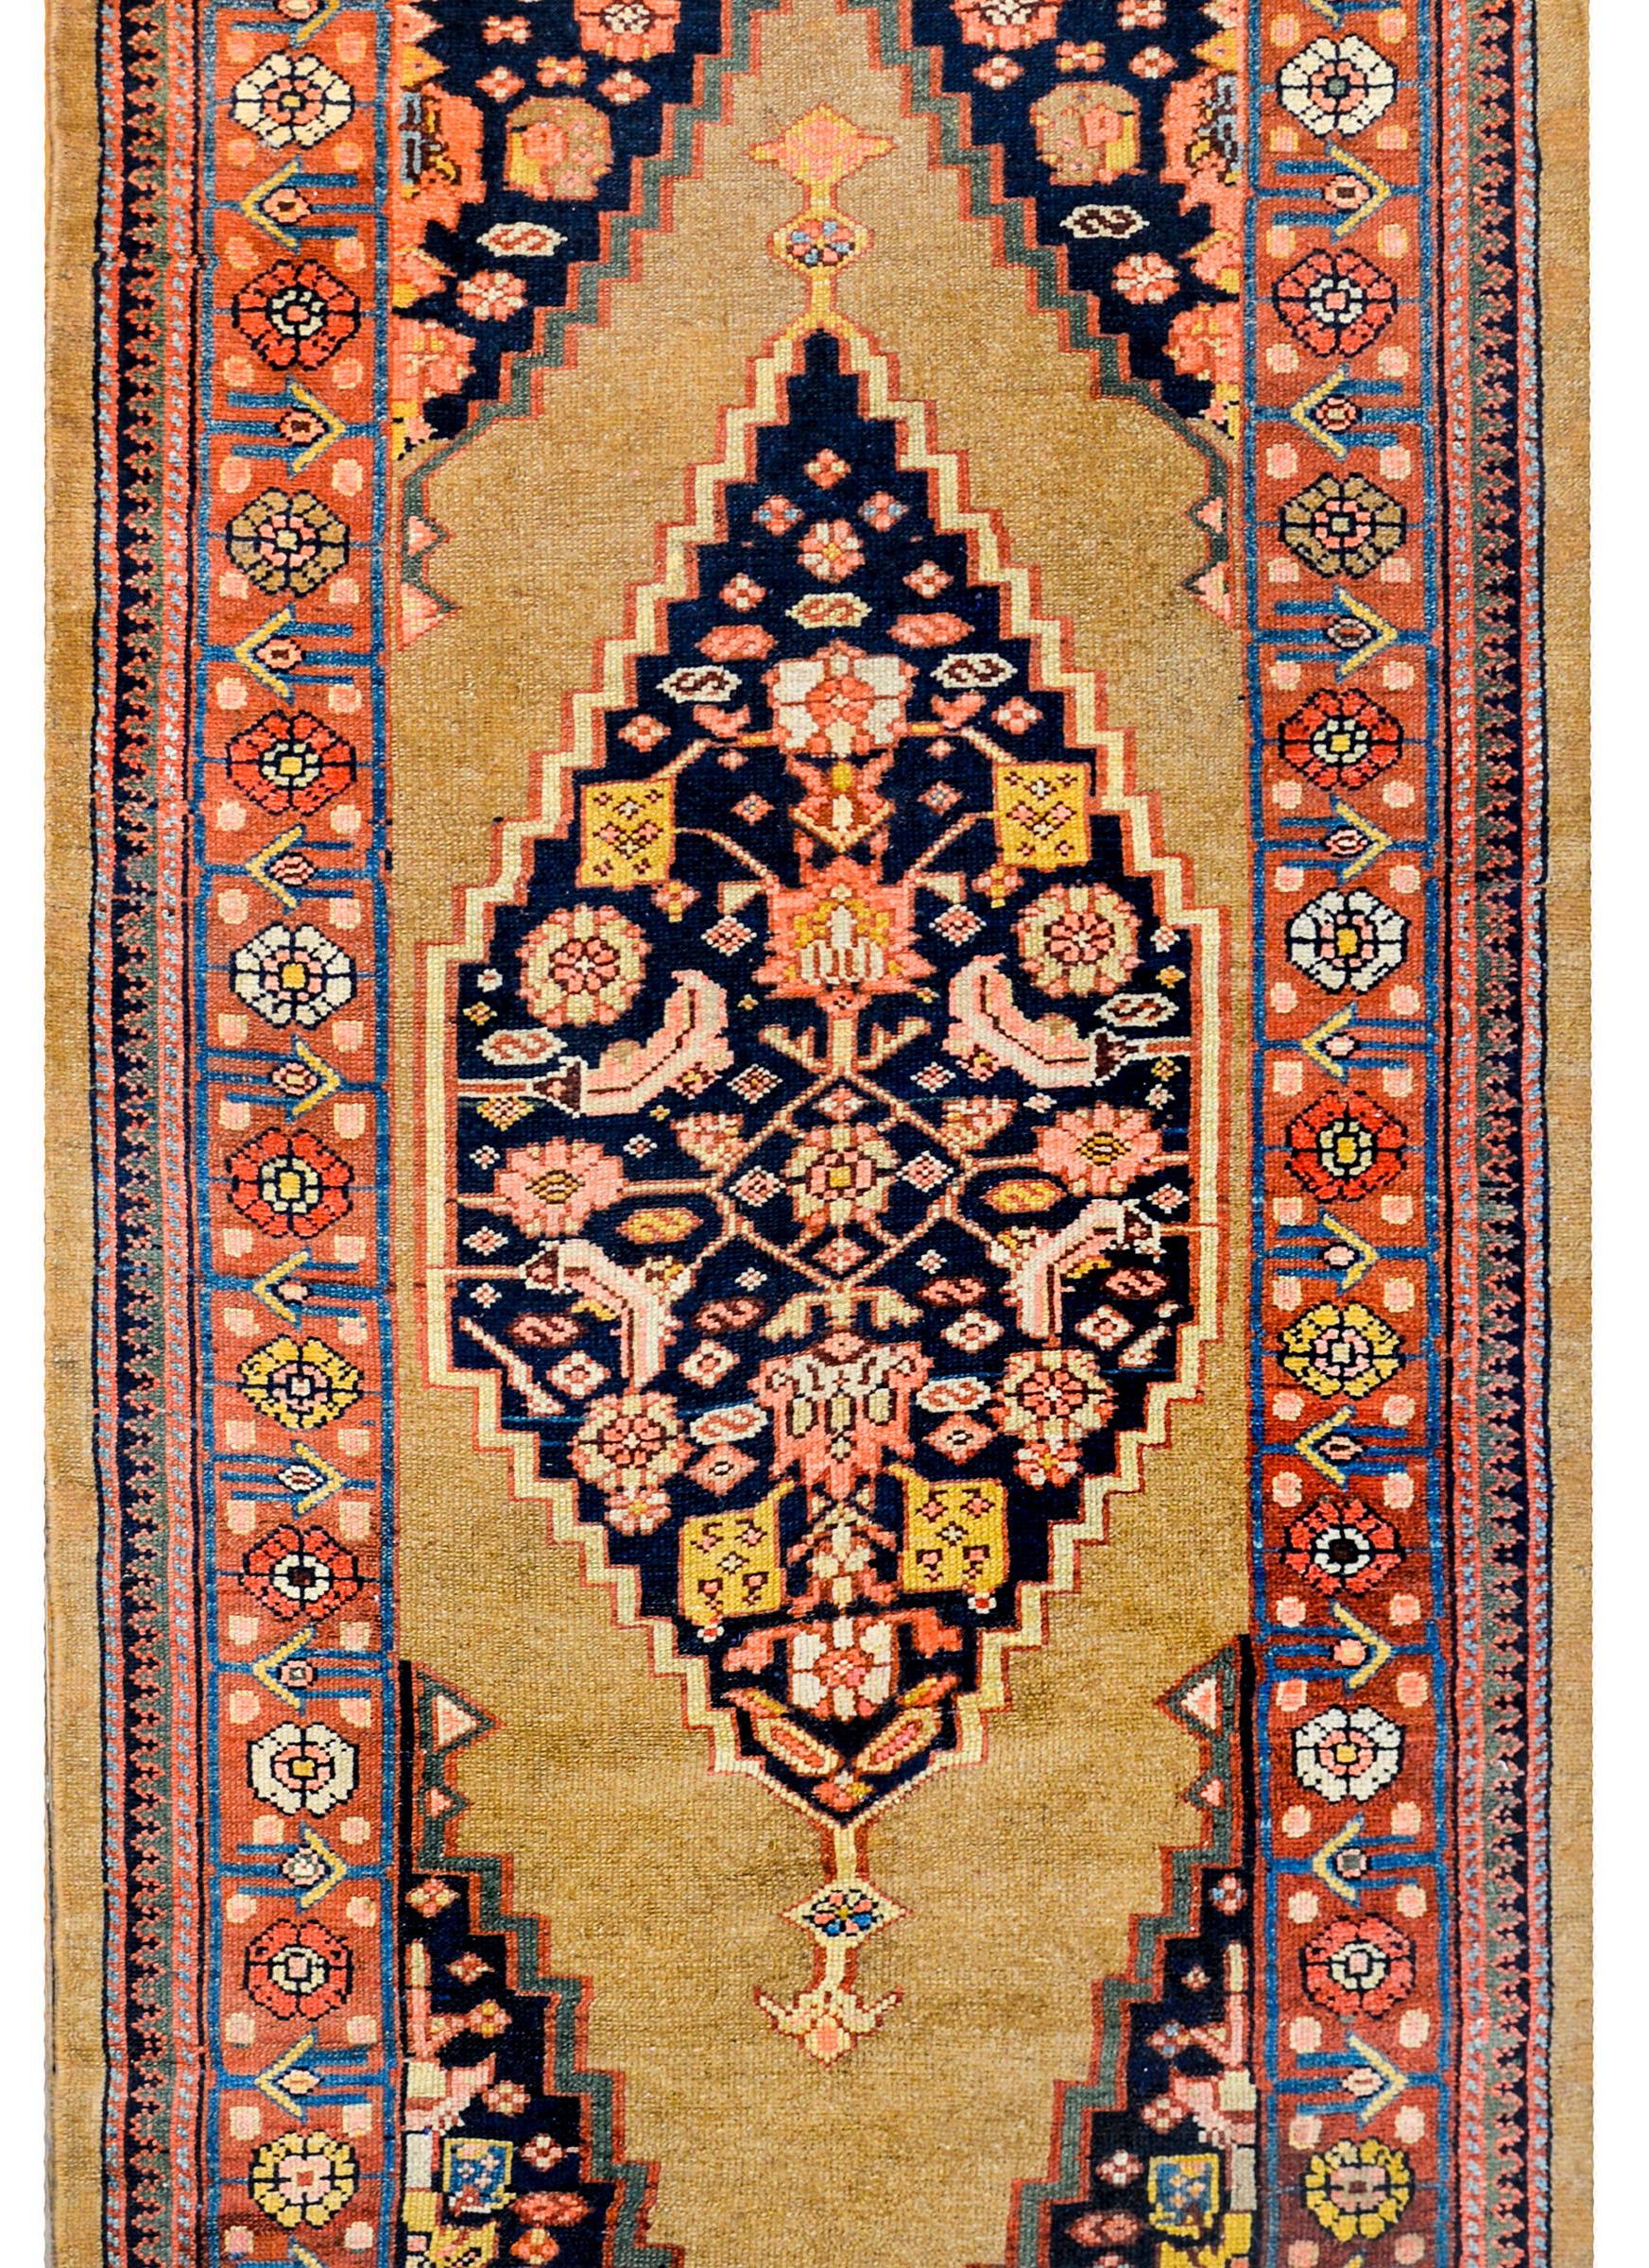 An early 20th century Persian Serab runner with an asymmetrical pattern with a floral patterned diamond on one end and the reverse pattern on the other all woven in pink, gold, and indigo surrounded by natural camel hair. The border is wonderful